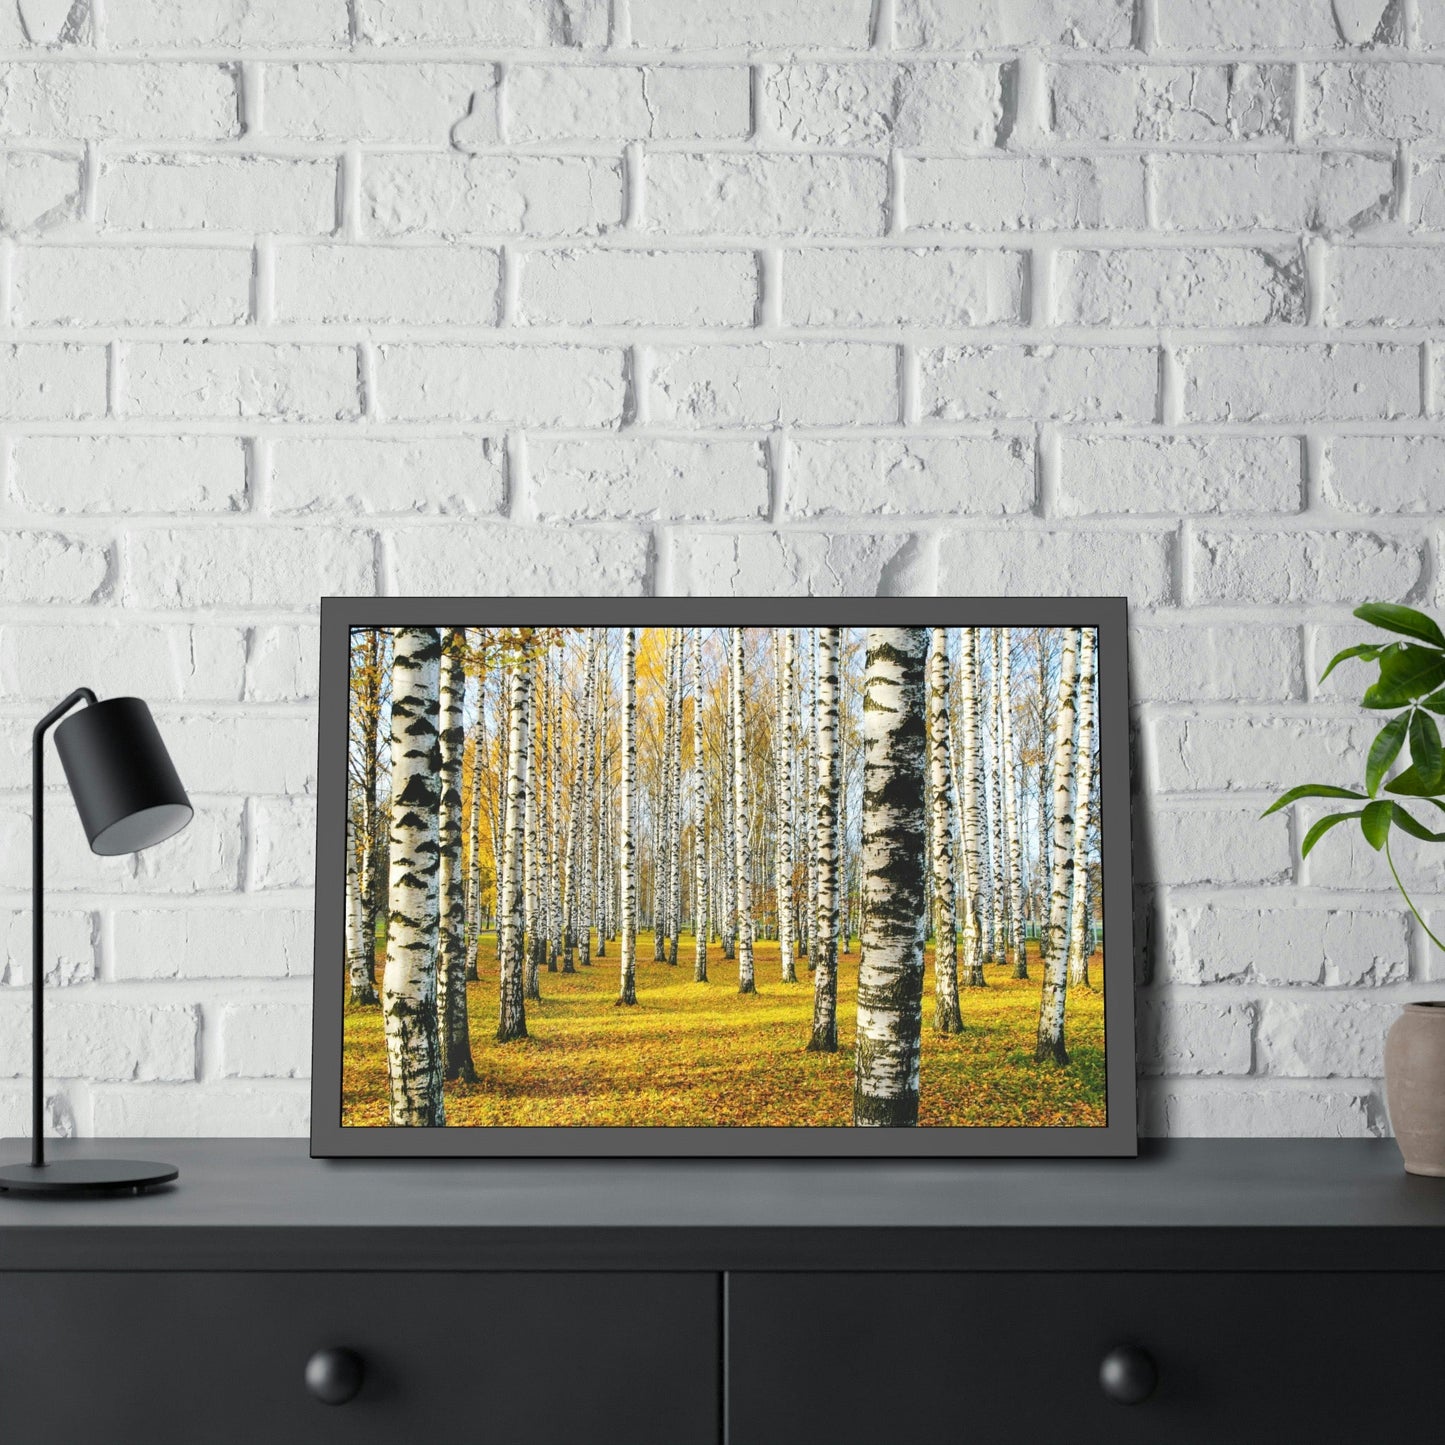 The Serene Beauty of Aspen Trees: Wall Art for Your Home